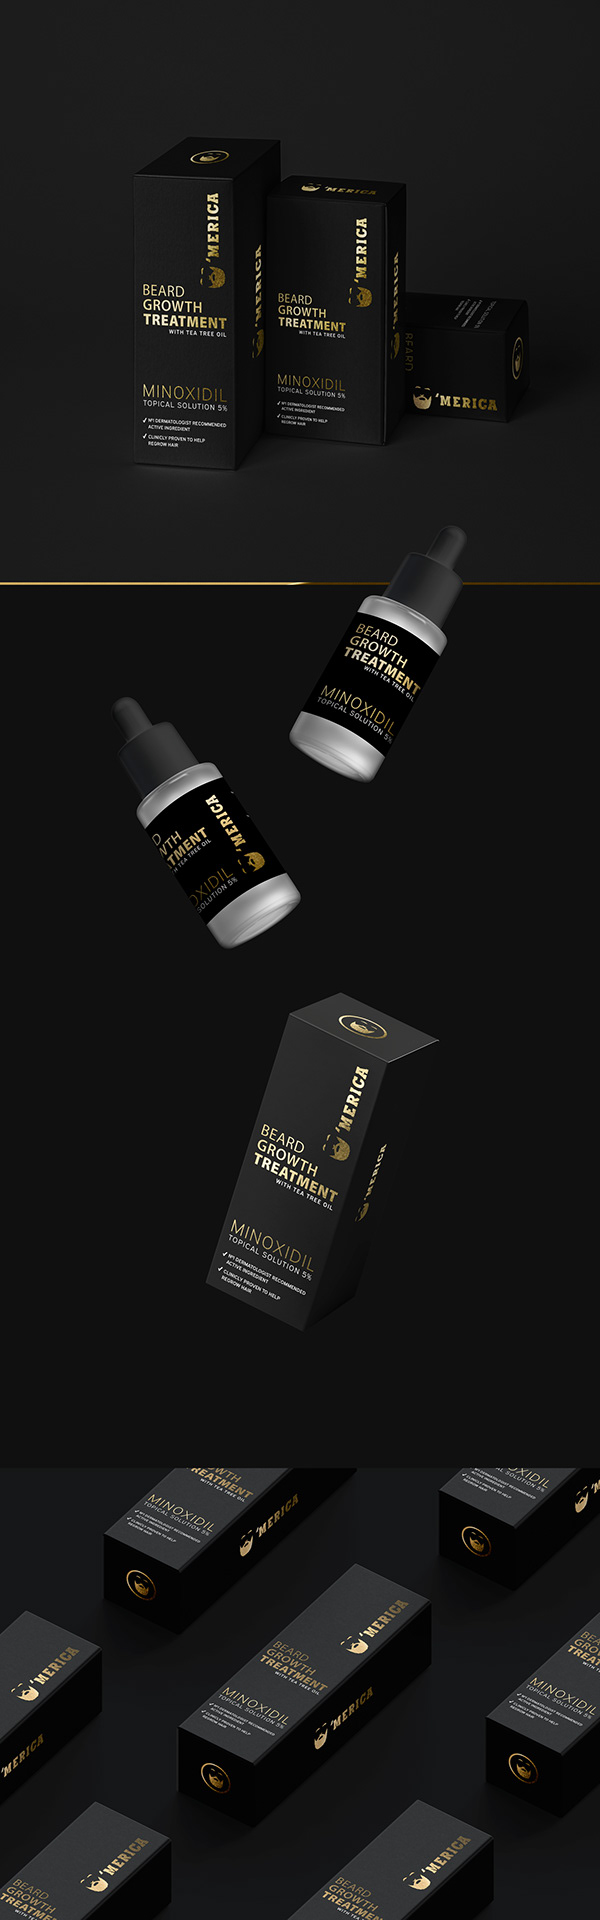 Packaging for Beard Growth Treatment